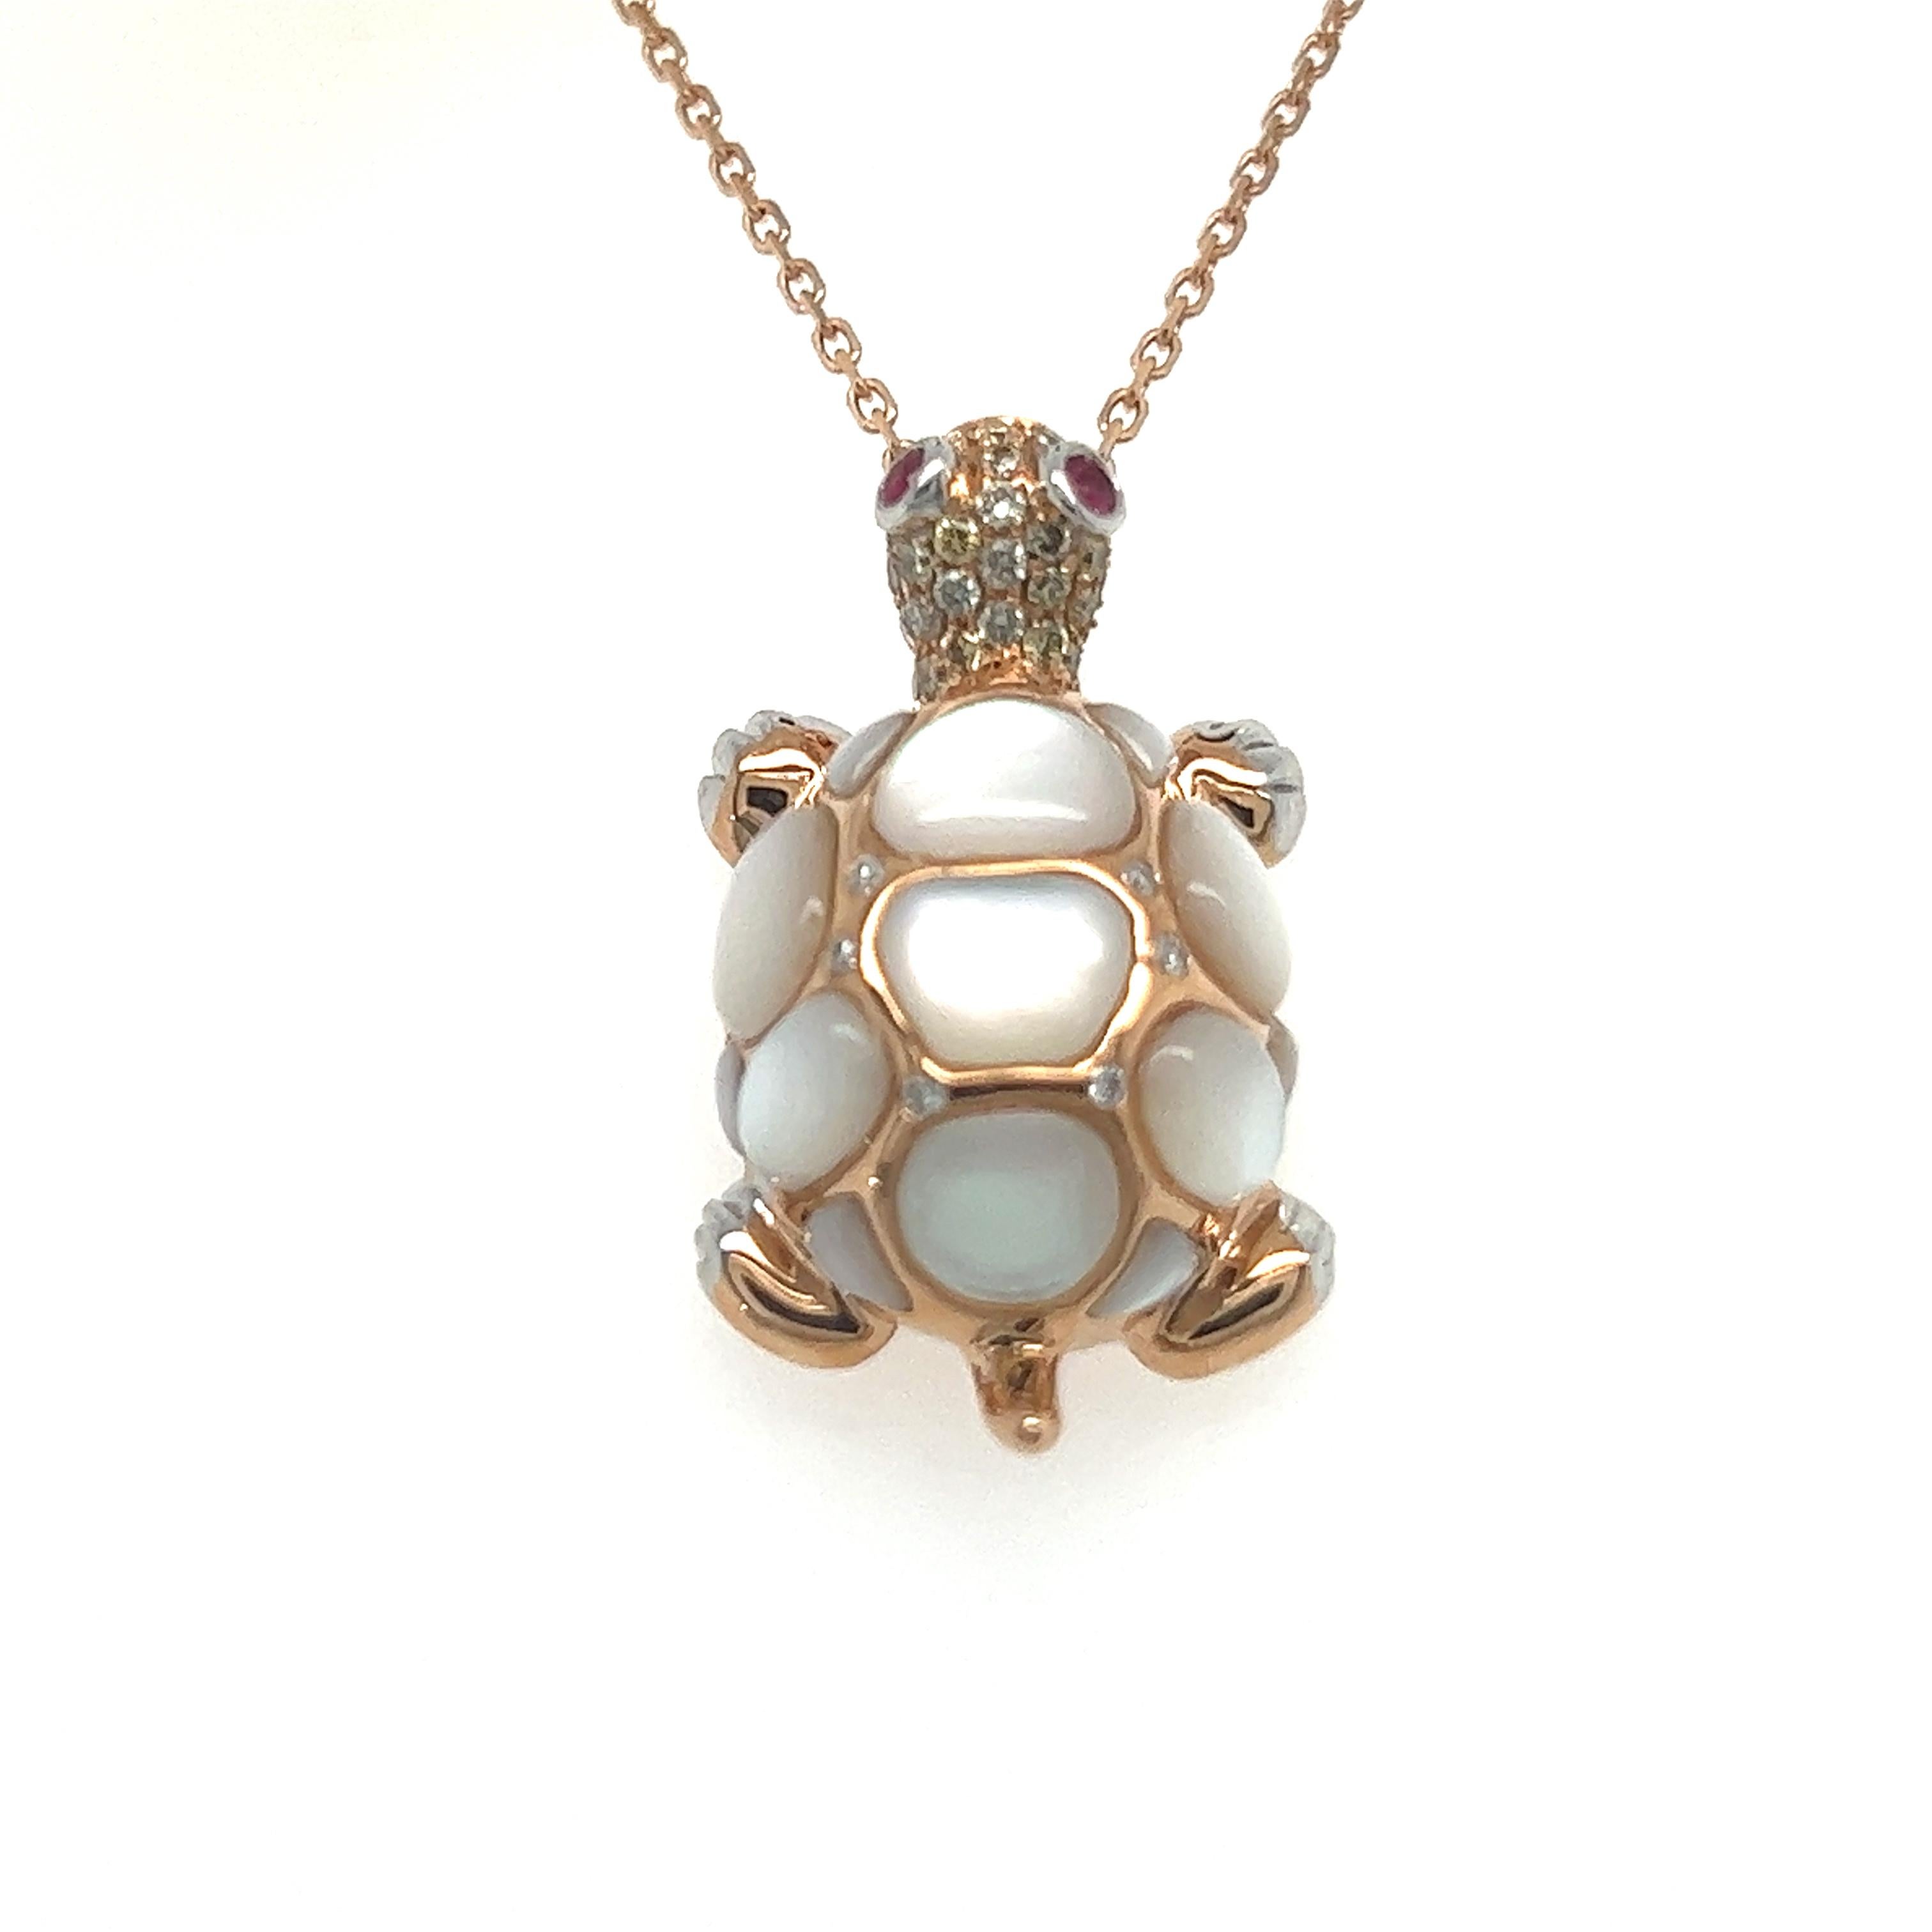 18 K Rose Gold White Shell & Fancy Diamonds Tortoise Necklace

6 Diamonds 0.03 CT
25 Fancy Diamonds 0.16 CT
2 Rubies 0.04 CT
13 White Pearls 3.85 CT
18 K Rose Gold 7.67 GM

The pearl meaning is centered around purity, balance, and inner wisdom.